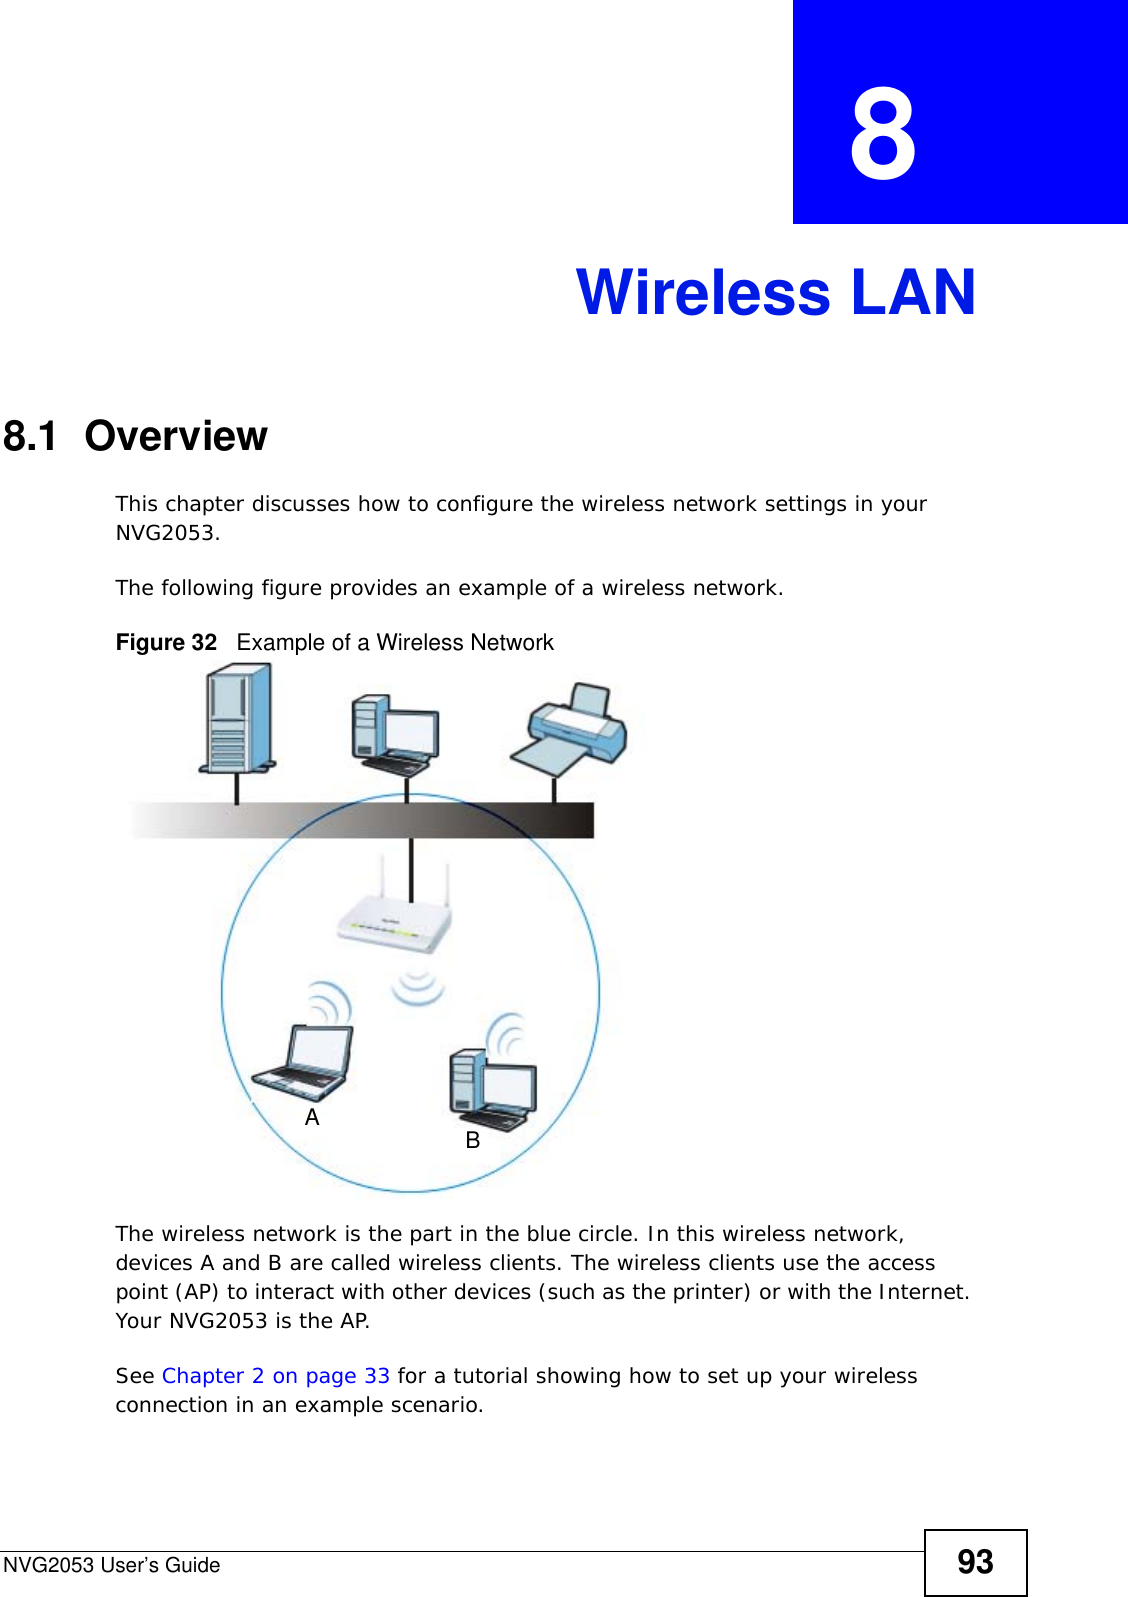 NVG2053 User’s Guide 93CHAPTER  8 Wireless LAN8.1  OverviewThis chapter discusses how to configure the wireless network settings in your NVG2053. The following figure provides an example of a wireless network.Figure 32   Example of a Wireless NetworkThe wireless network is the part in the blue circle. In this wireless network, devices A and B are called wireless clients. The wireless clients use the access point (AP) to interact with other devices (such as the printer) or with the Internet. Your NVG2053 is the AP.See Chapter 2 on page 33 for a tutorial showing how to set up your wireless connection in an example scenario.AB